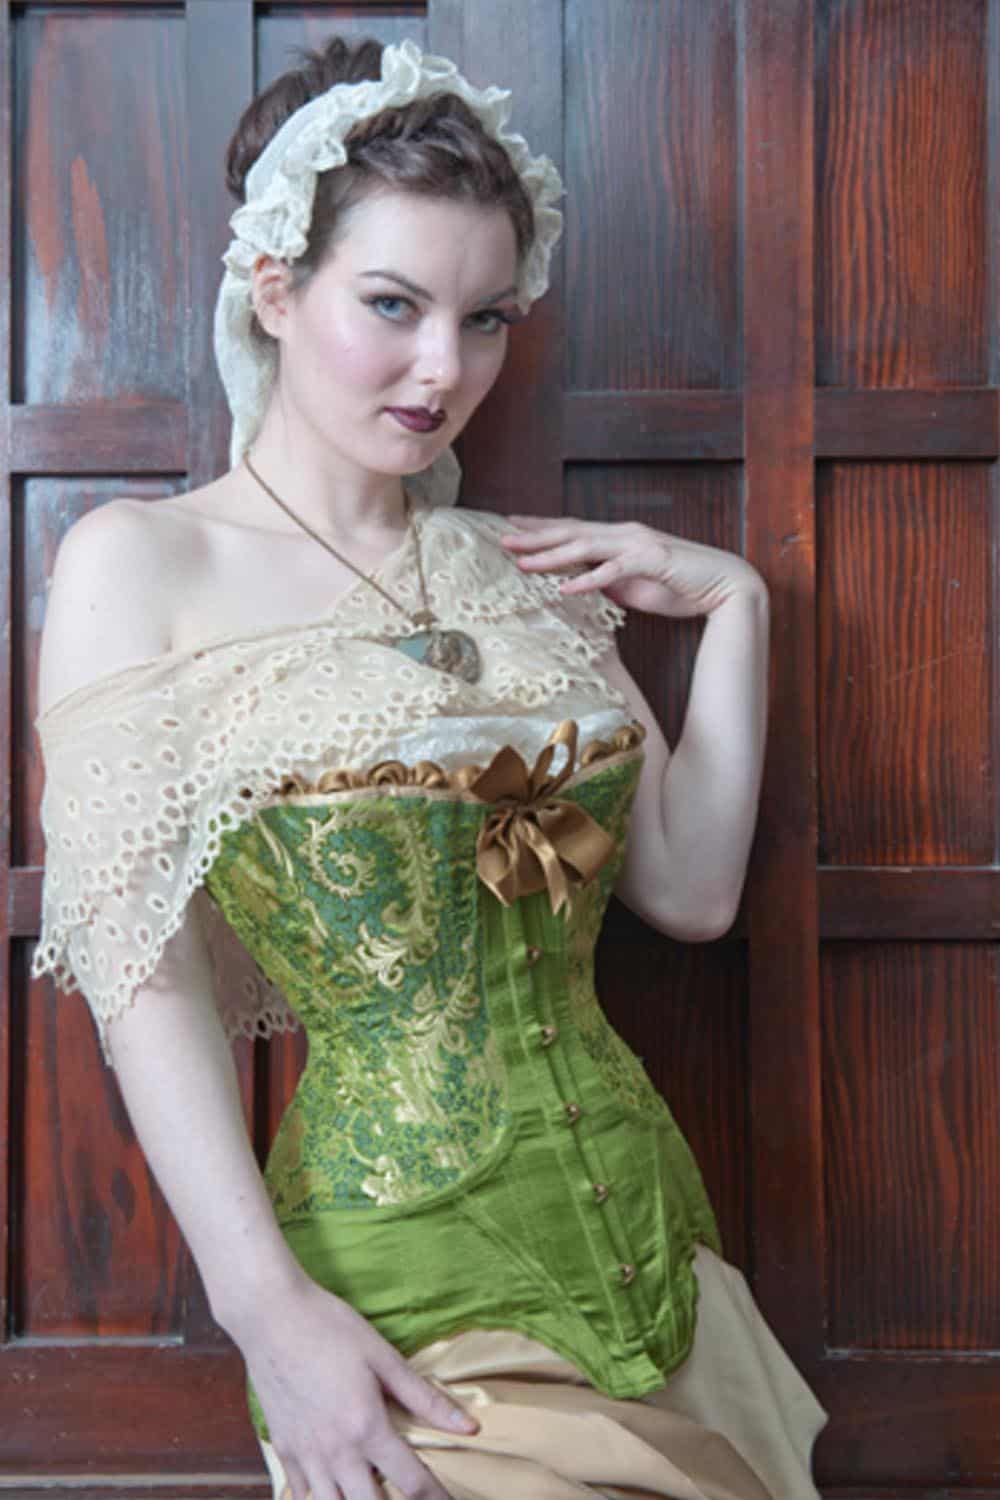 Shop our Bespoke Corset & Steampunk Corset from the store at low price